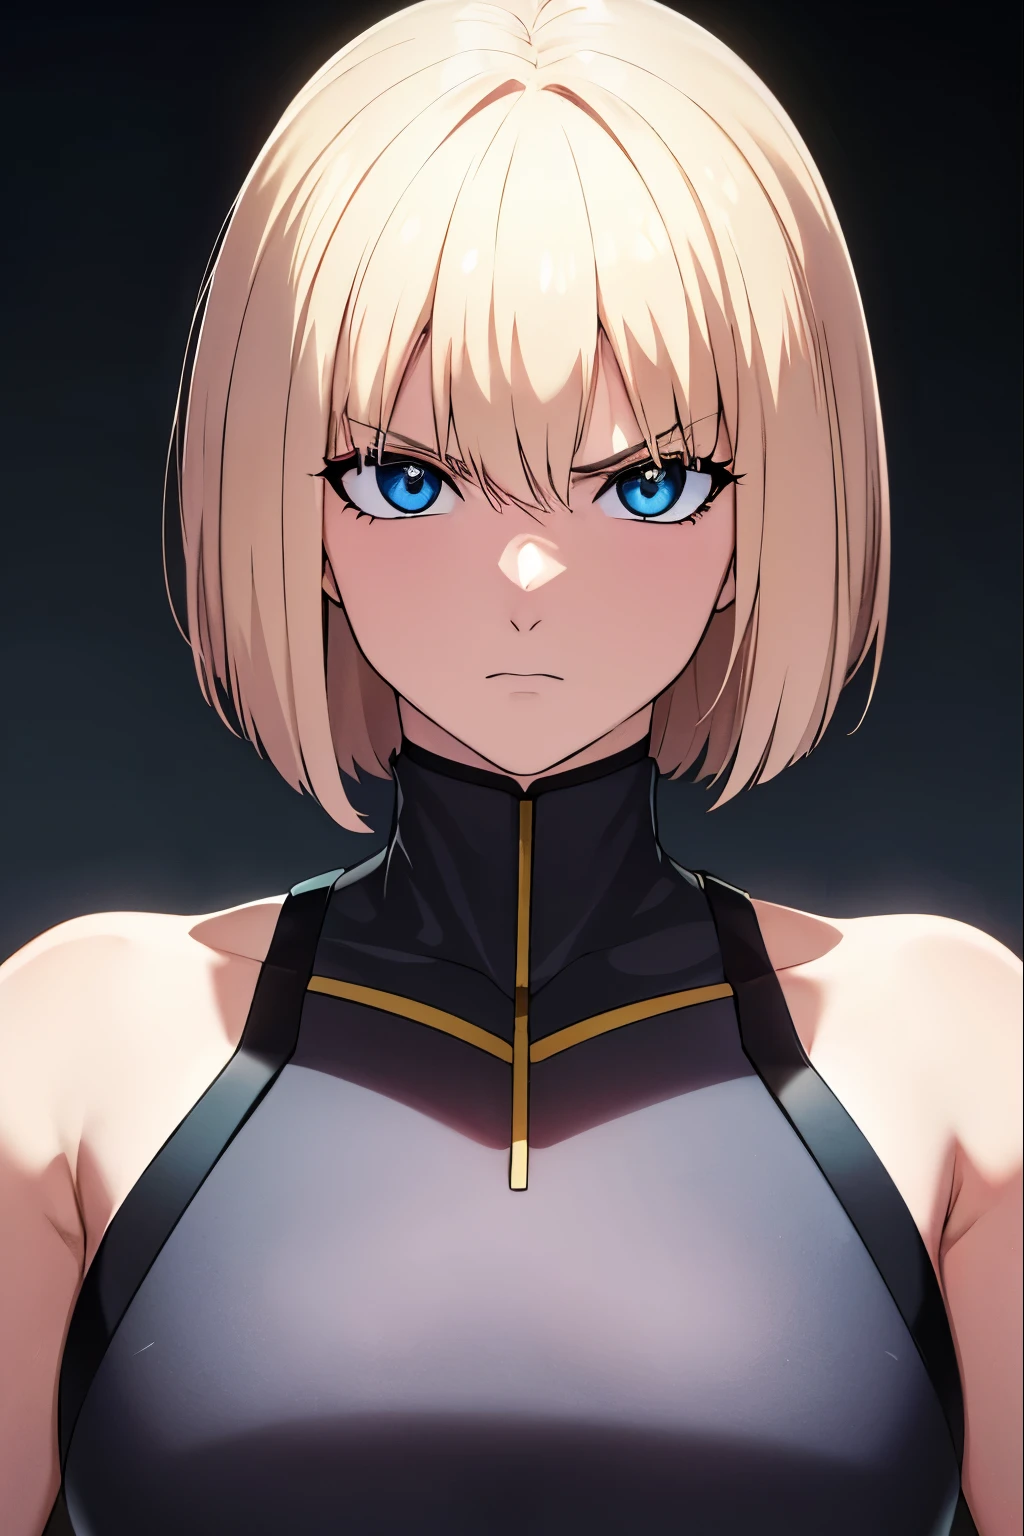 citys, best qualityer, high resolution, extreme detailed face, perfect lighting, extremely detailed CG, Perfect Anatomia, アニメ, 2d, short black hair, Young man, serious expression, eyes black